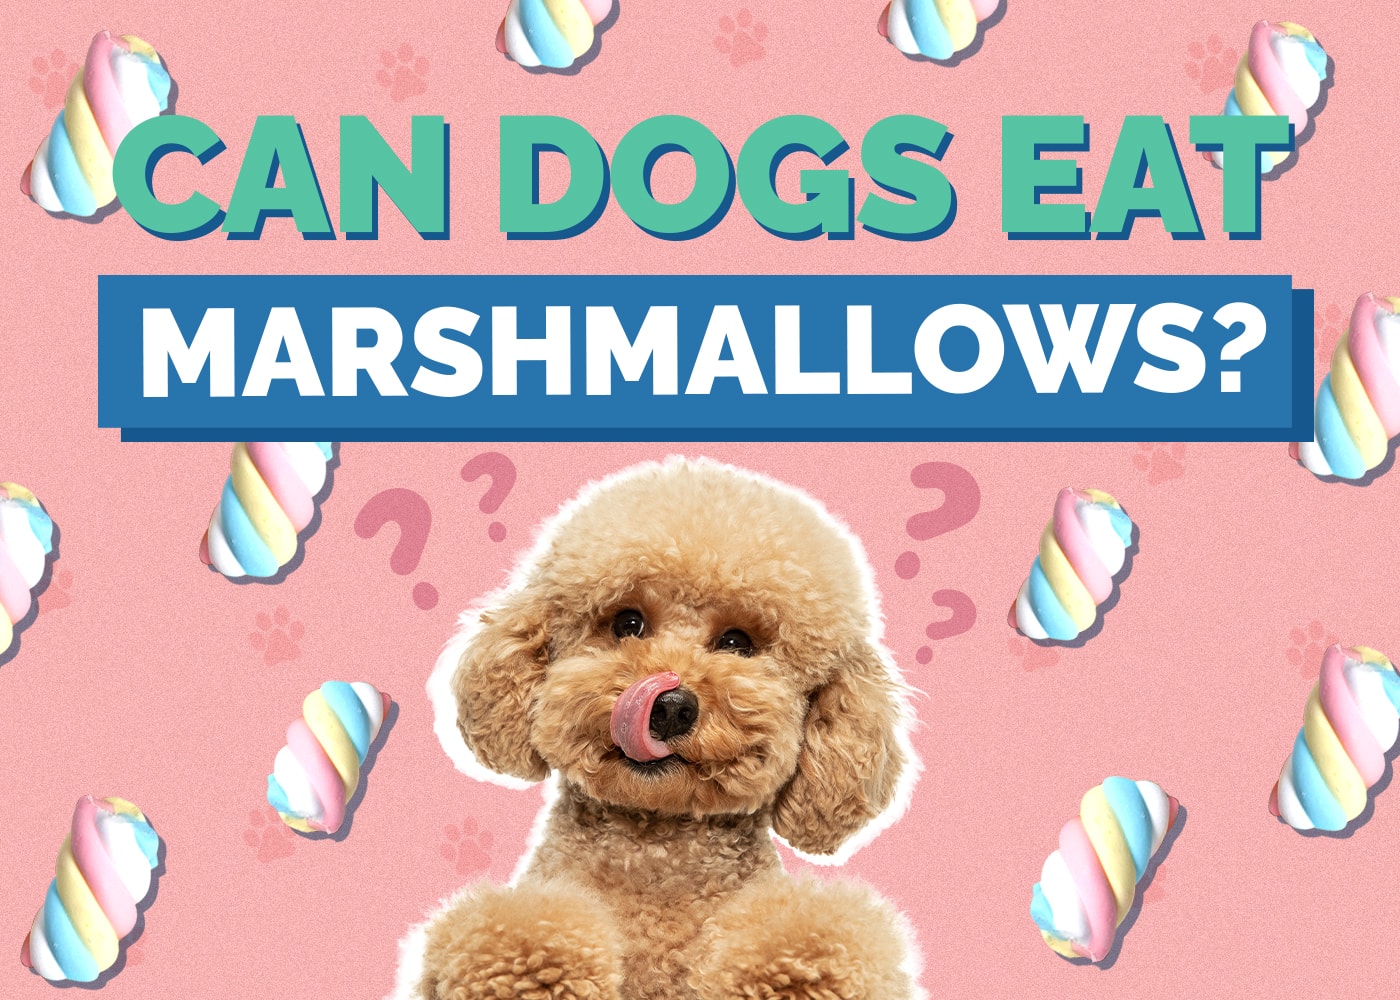 Can Dogs Eat marshmallow